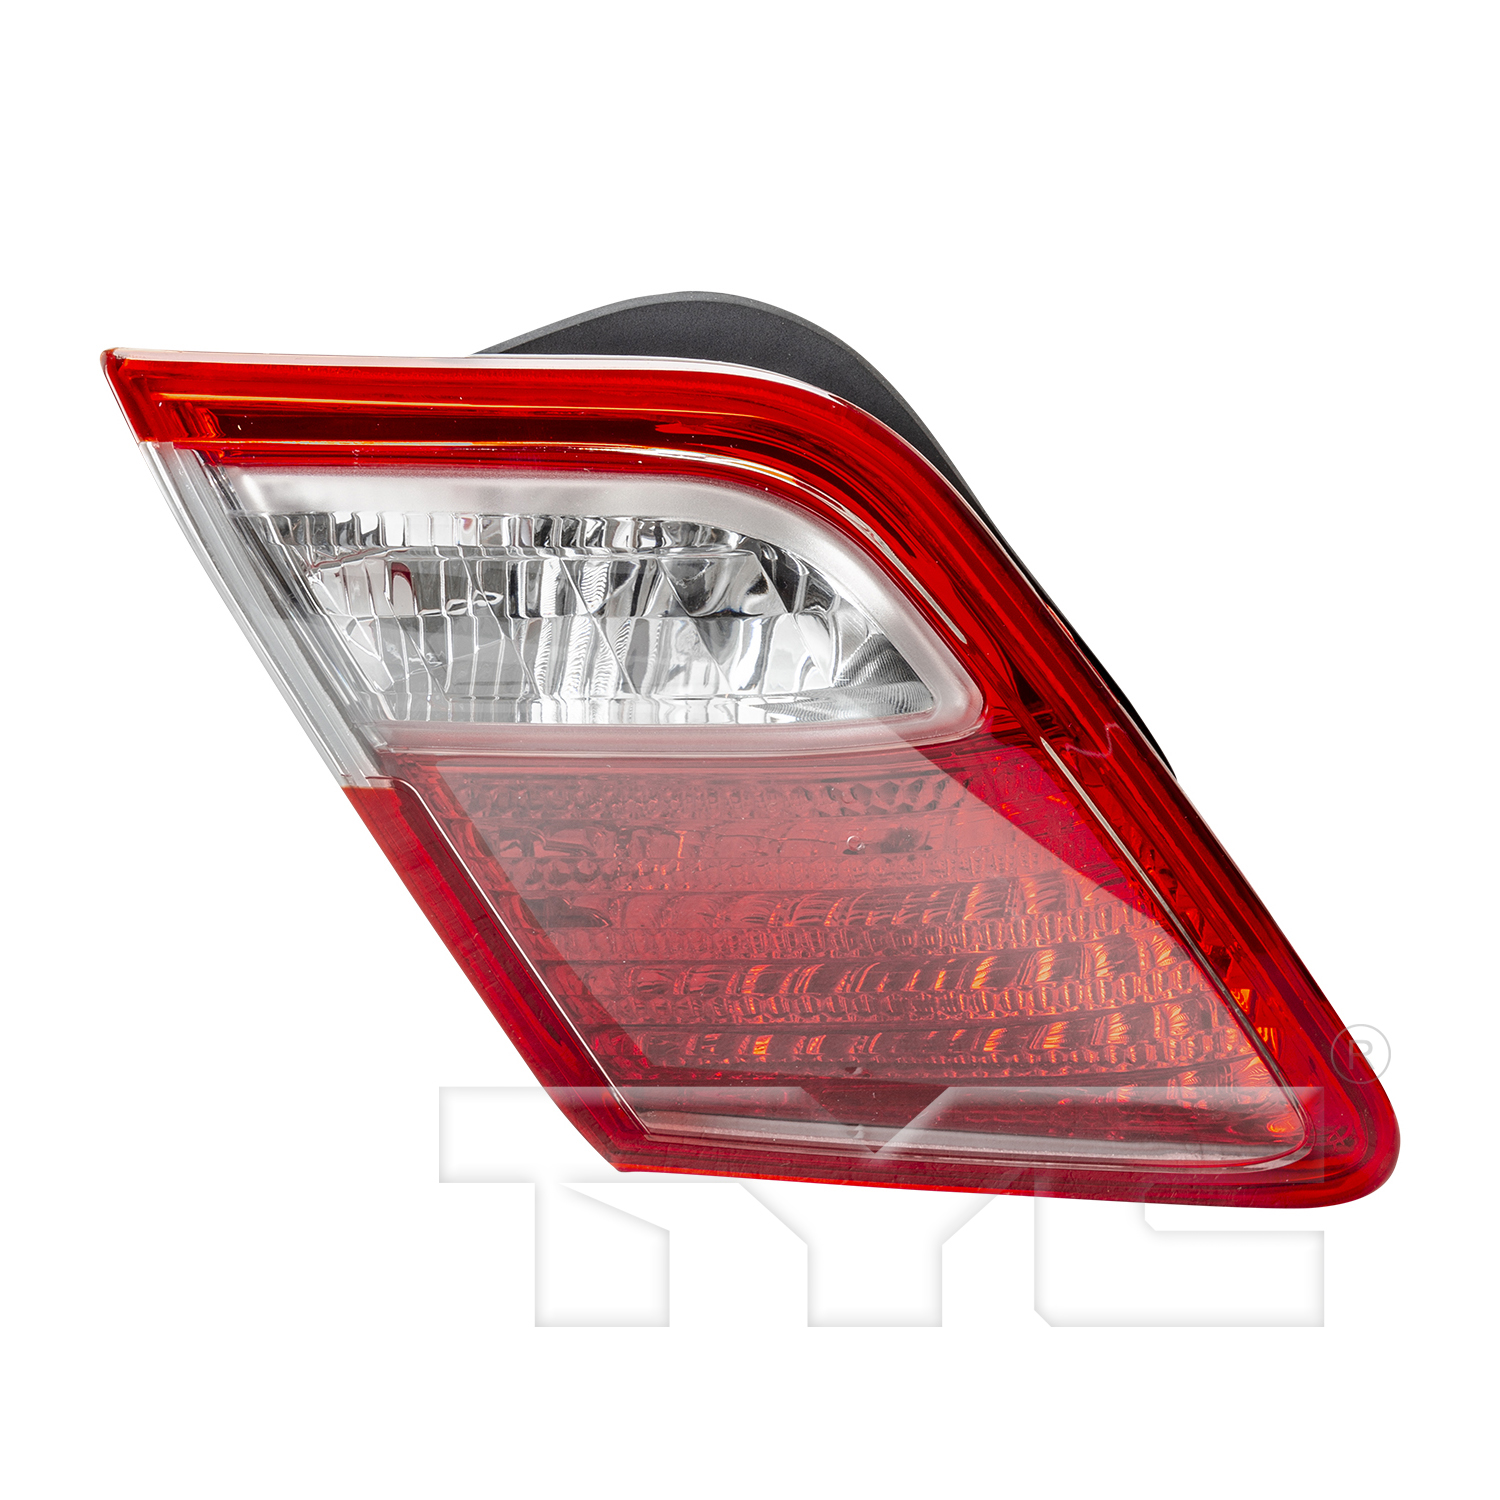 Aftermarket TAILLIGHTS for TOYOTA - CAMRY, CAMRY,07-09,LT Taillamp lens/housing